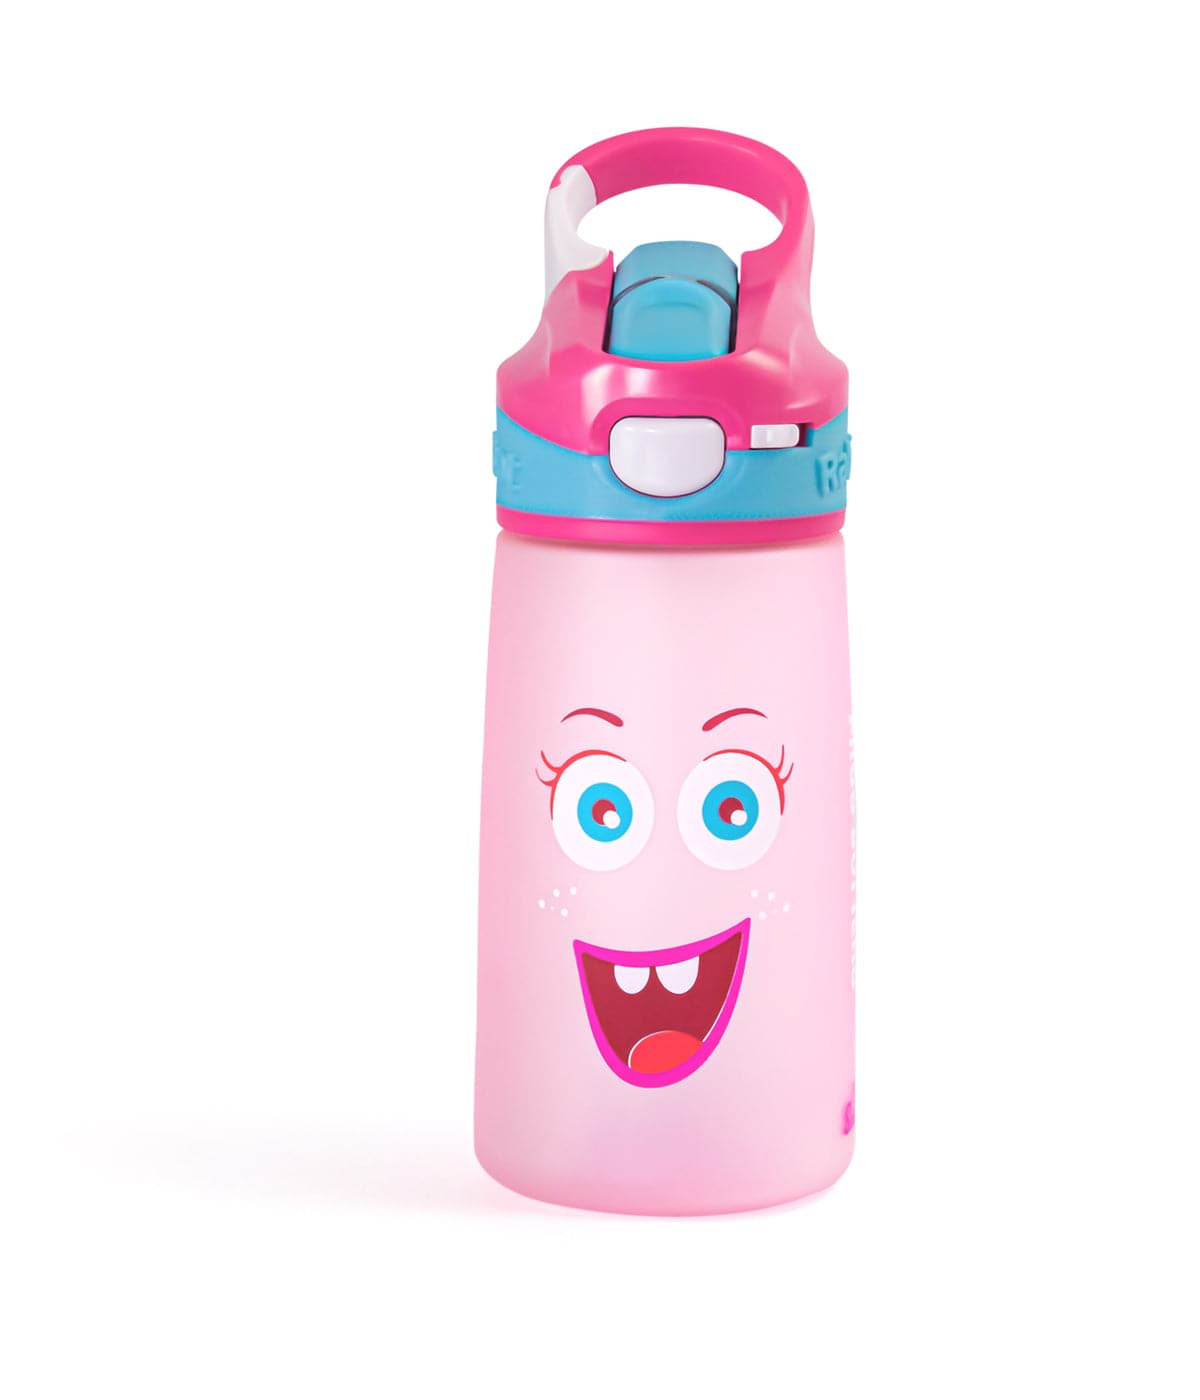 Peppa Pig Stainless Steel Flask Insulated Sipper Water Bottle for Boys Kids